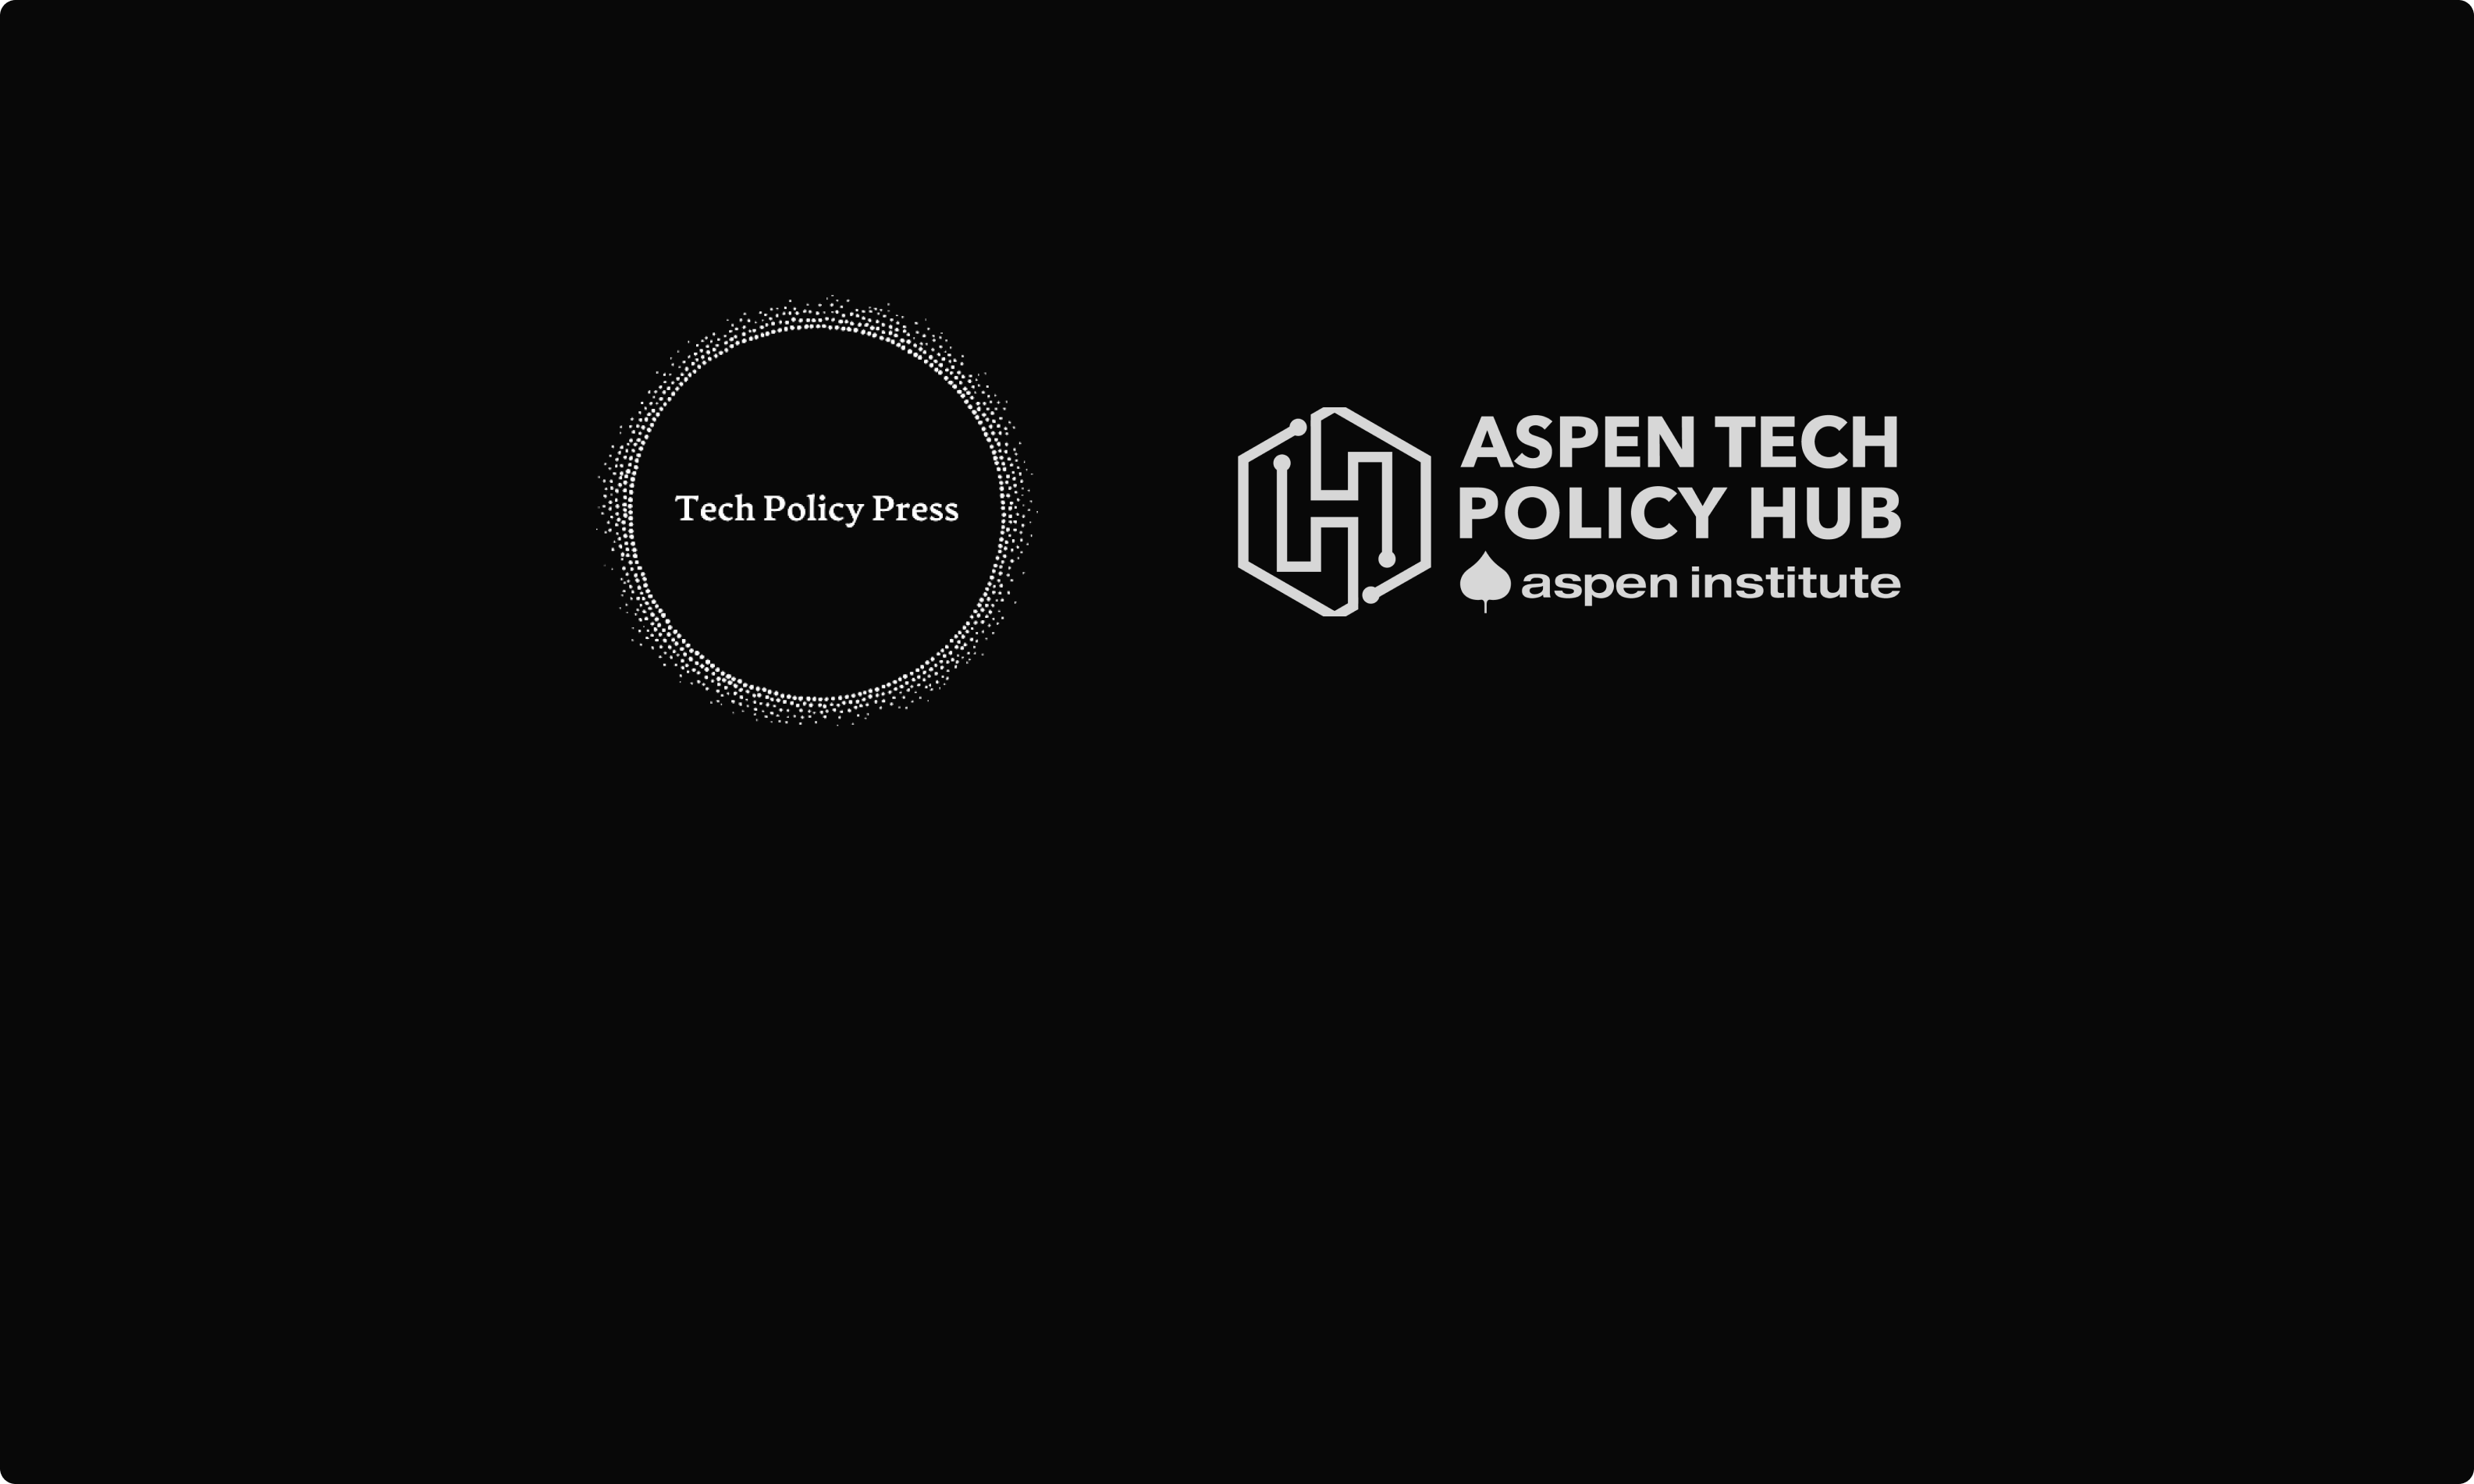 Aspen Tech Policy Hub: Announcing New Partnership with Tech Policy Press